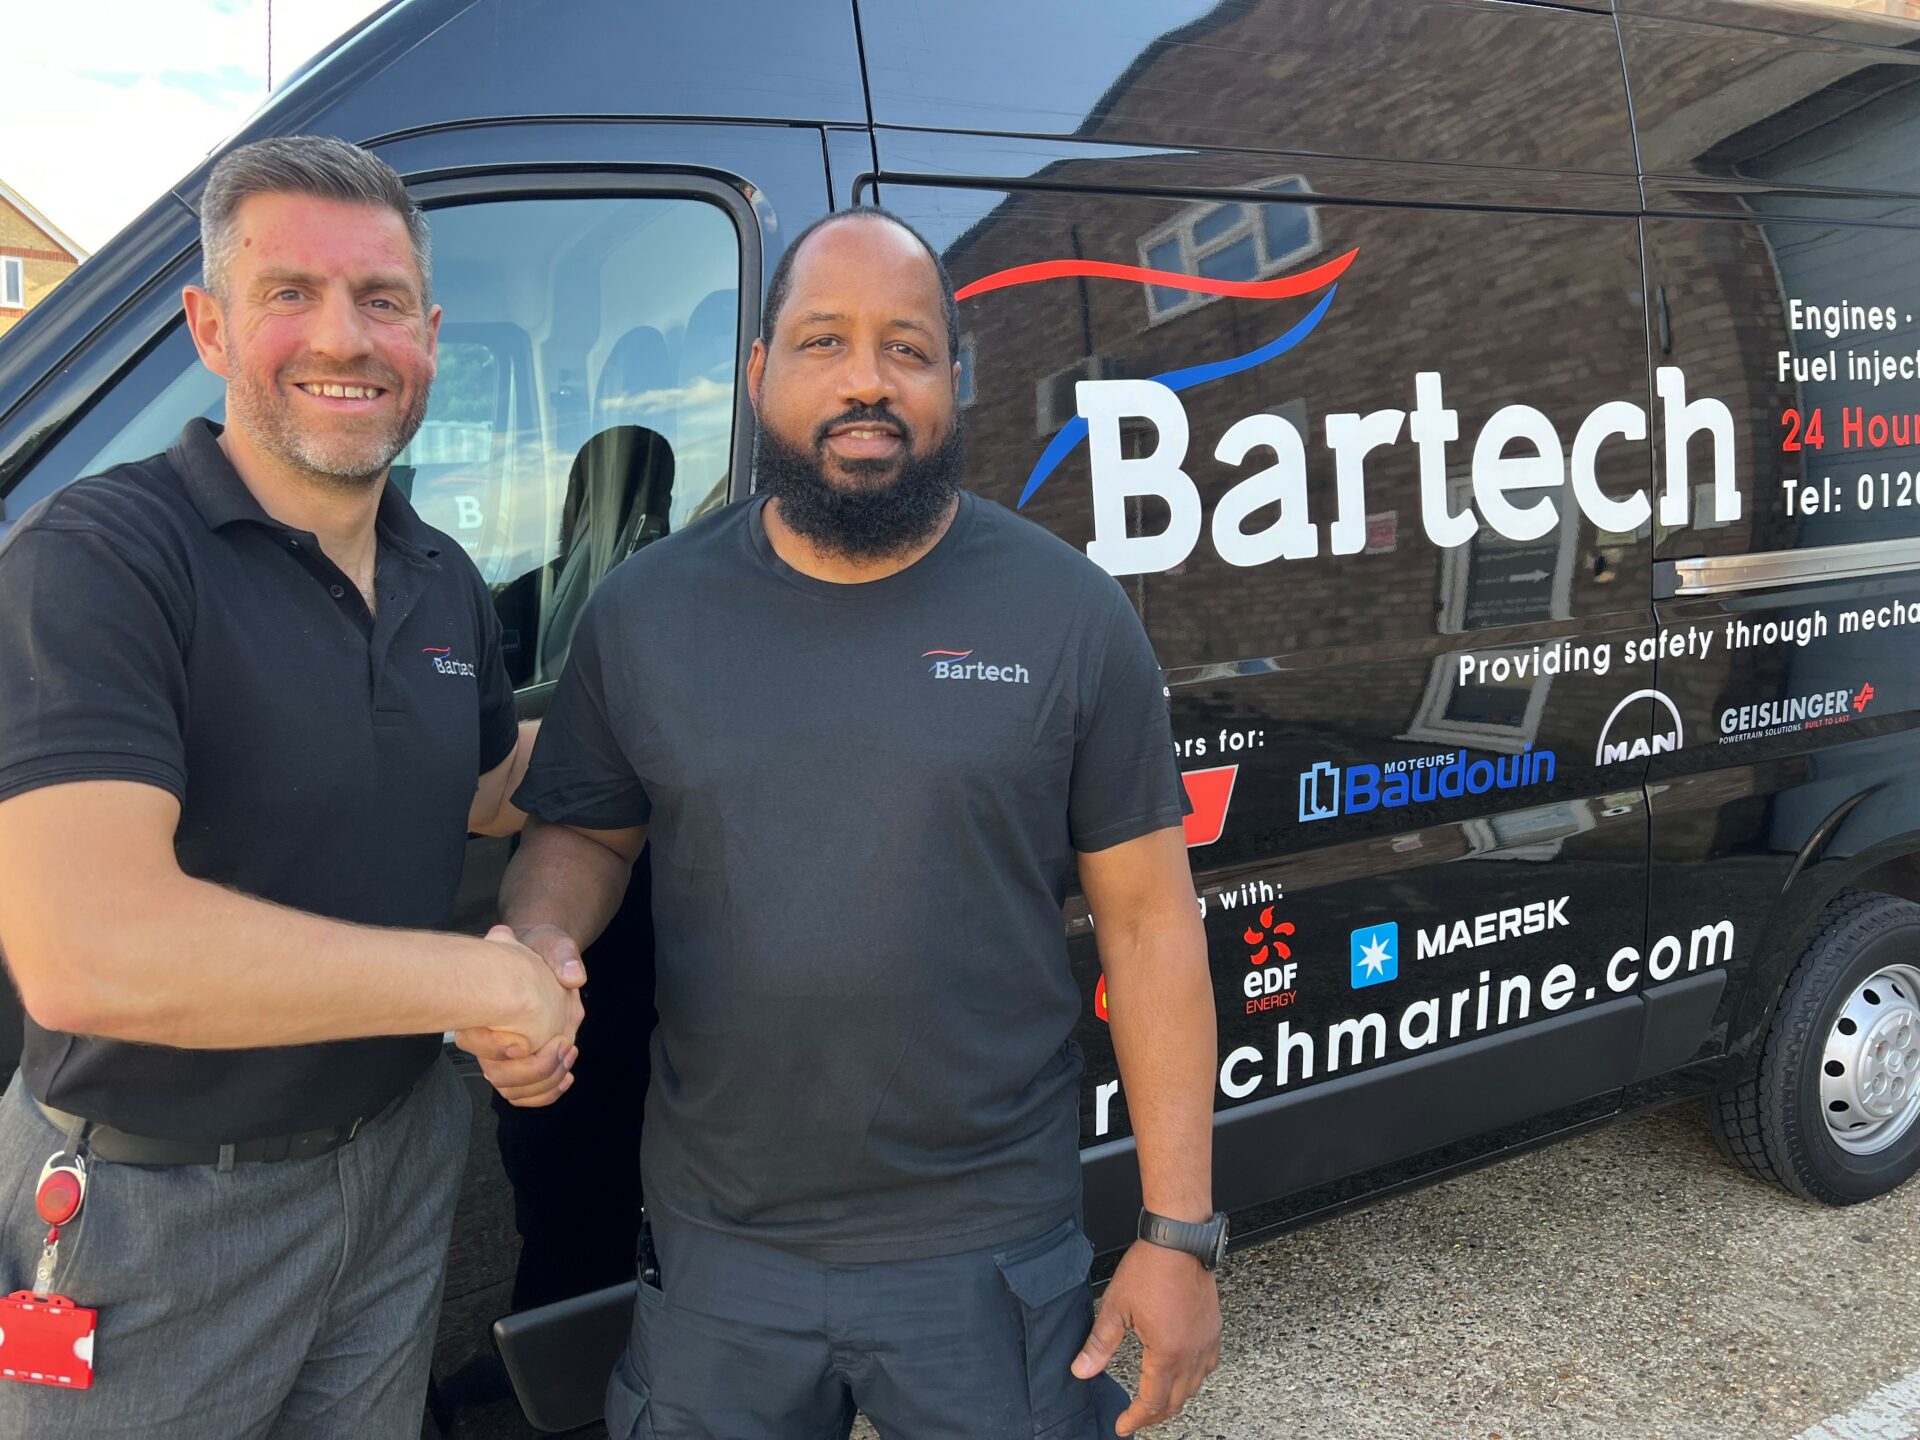 Welcome to Daveed and Bartech Control Systems